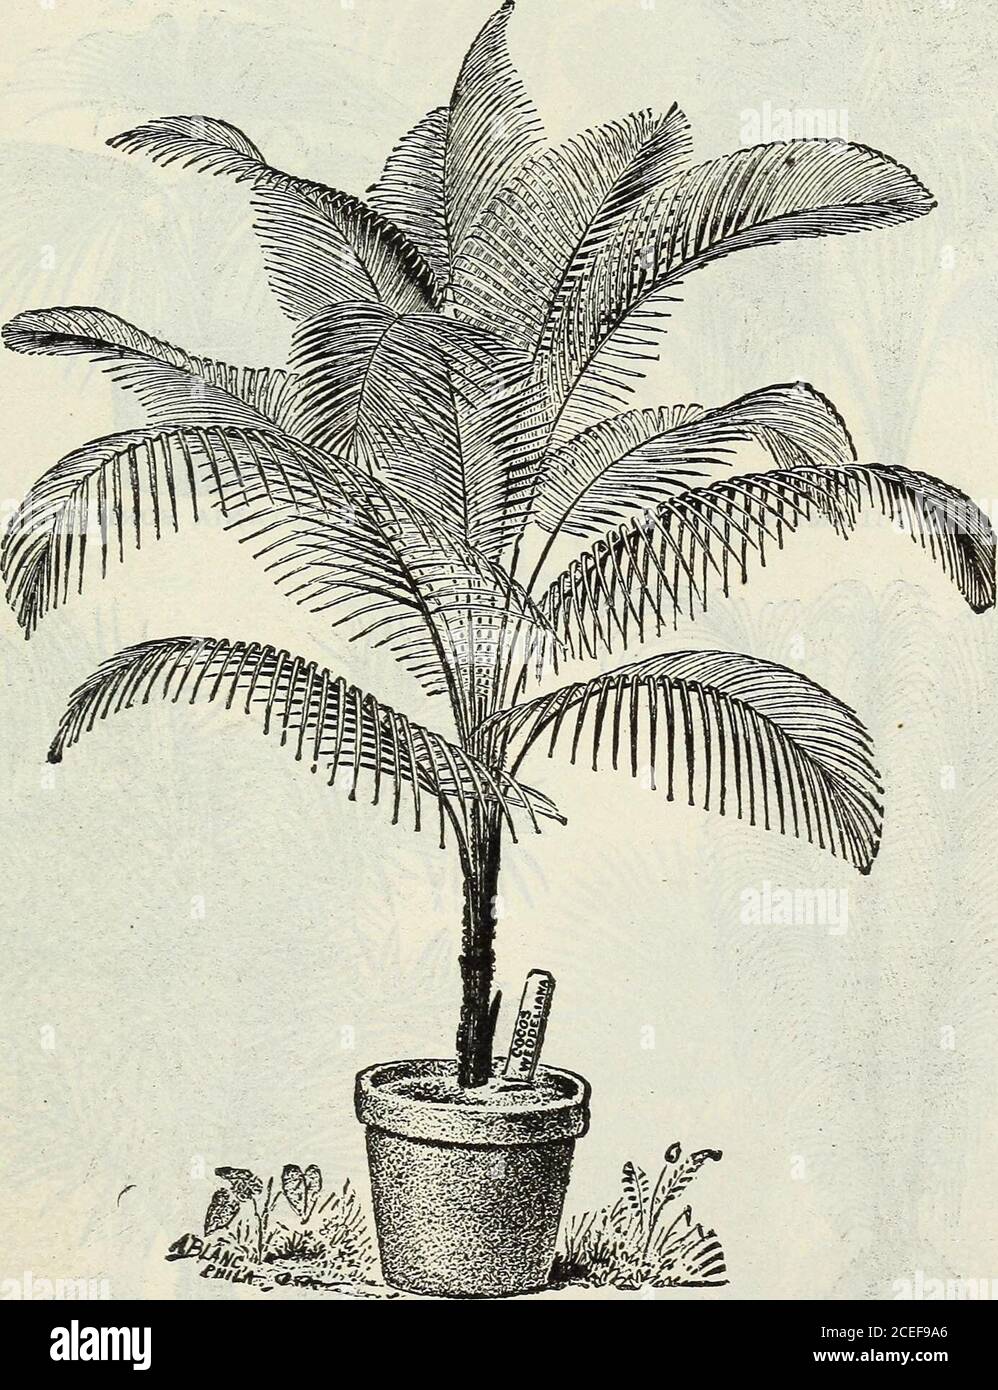 . John Saul's Washington nurseries catalogue of plants for the spring of 1888. rium innocentii. Sanseveria Guinionsis. 75 cents. Zeylanica. 50 cents.*Tillandsia.*Zahnii (Zebrina). SI 50.*Splendens (Zebrina).♦Variegated Pine Apple (Ananasia Sativa Variegata). $2.50.*Vriesia Glaucophylla. Brachystachya, a charming piant,fo]iagelight greenwith cross bars of a dark green; flowers yellow andcrimson, last three months in beauty. §2.00 each- OF NEW, RARE AlfD BEAUTIFUL PLANTS. 63 *PALMS. We are cultivating some of the most desirable and popular of these beautiful plants,prices of which vary with heig Stock Photo